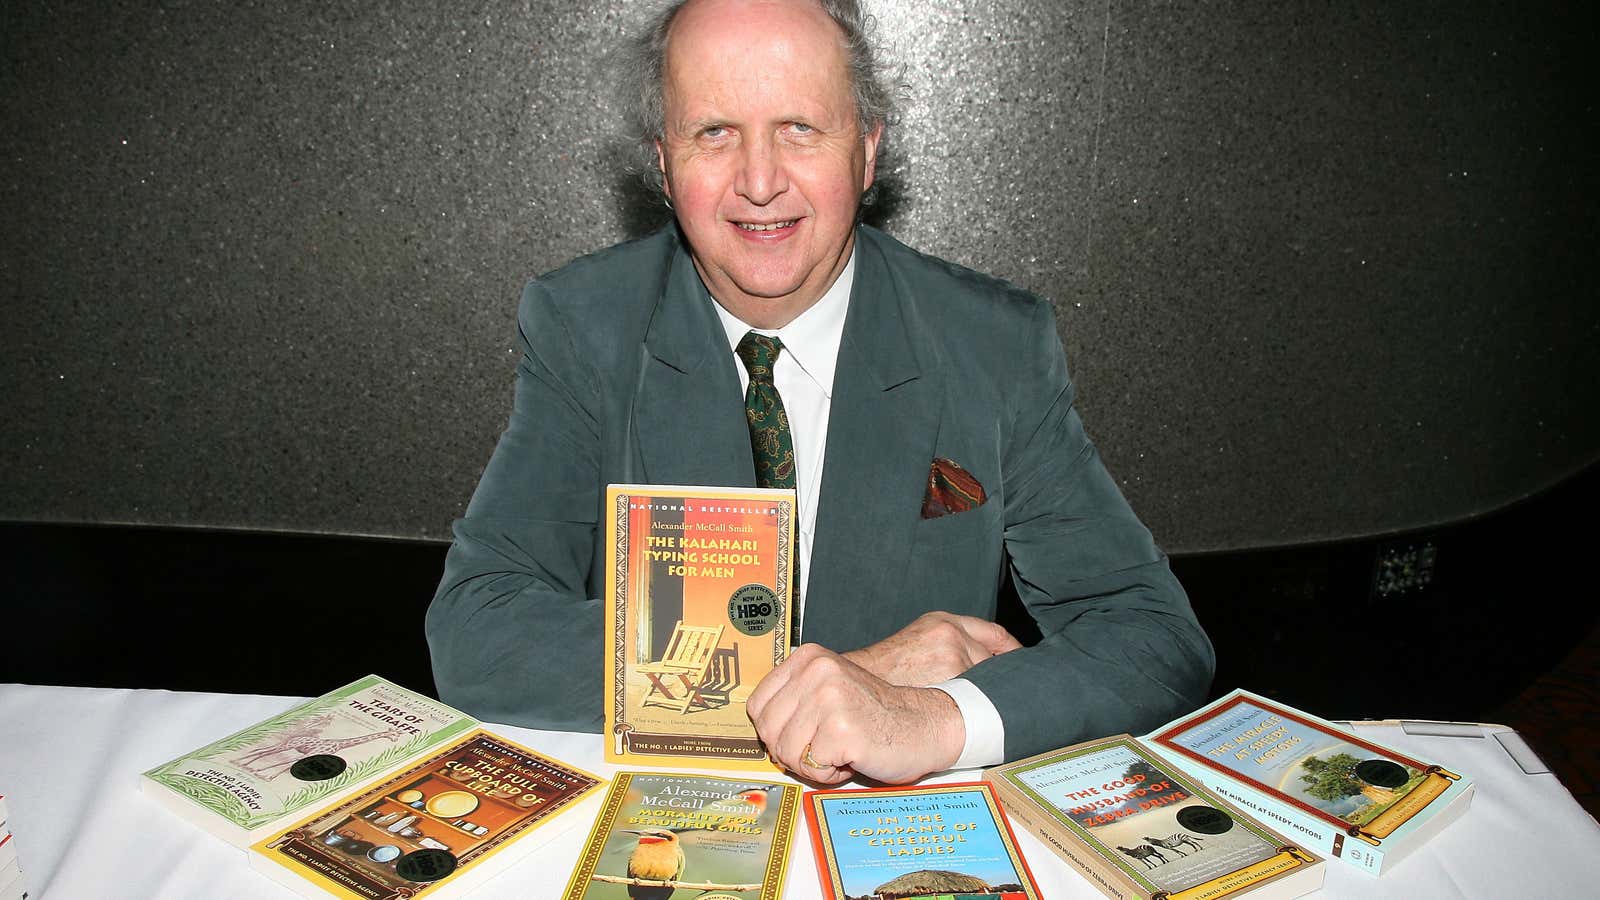 McCall Smith poses with some of the books from his bestselling series set in Botswana.